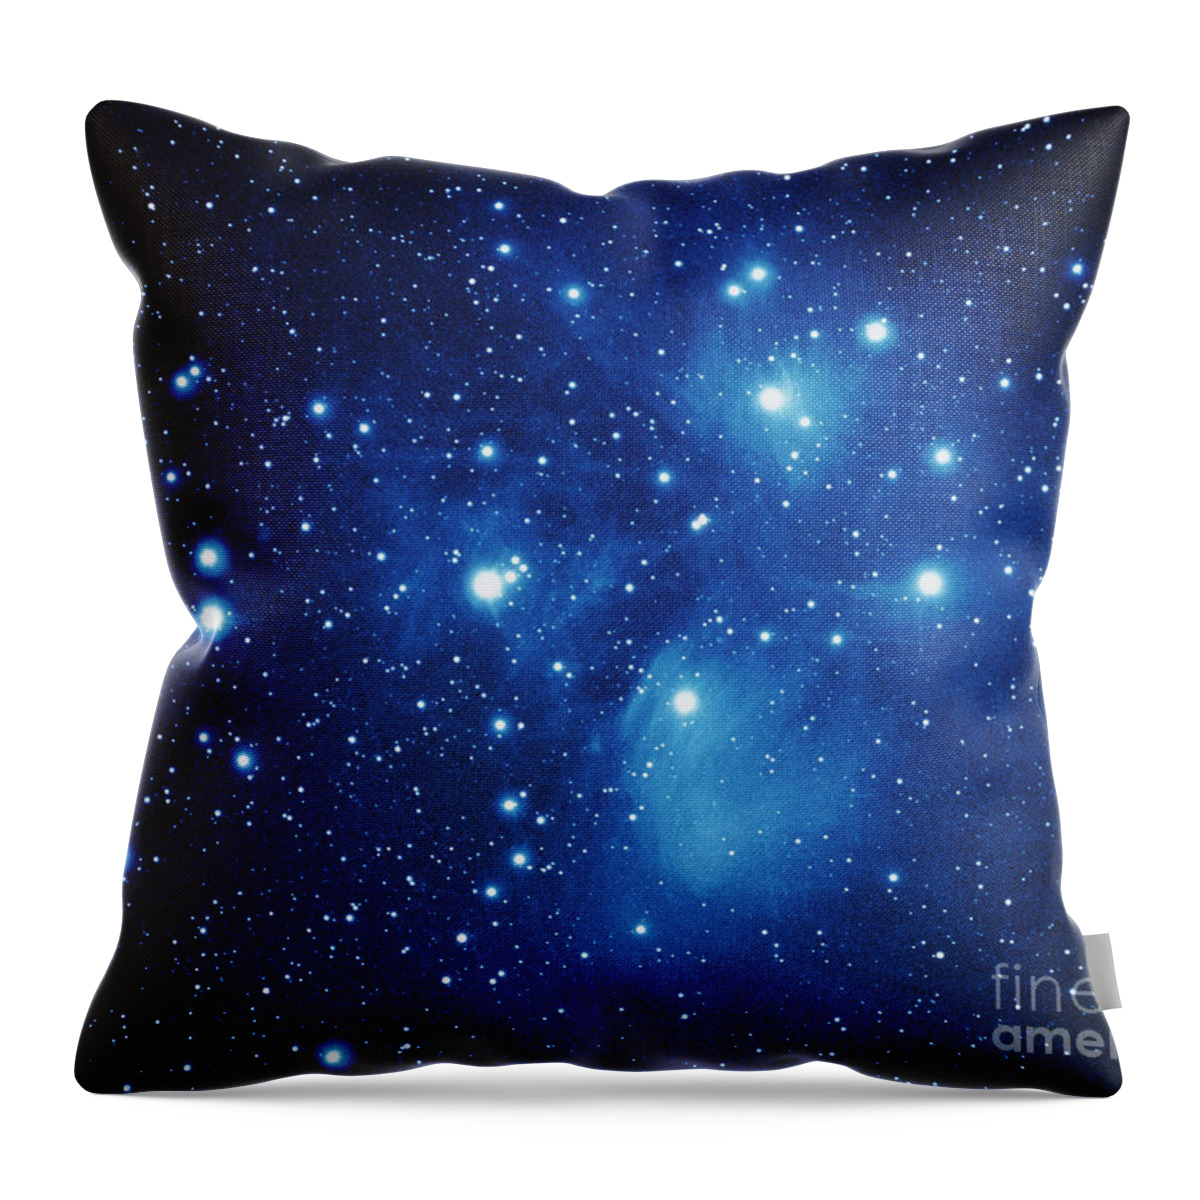 M45 Throw Pillow featuring the photograph Pleiades Star Cluster by Jason Ware